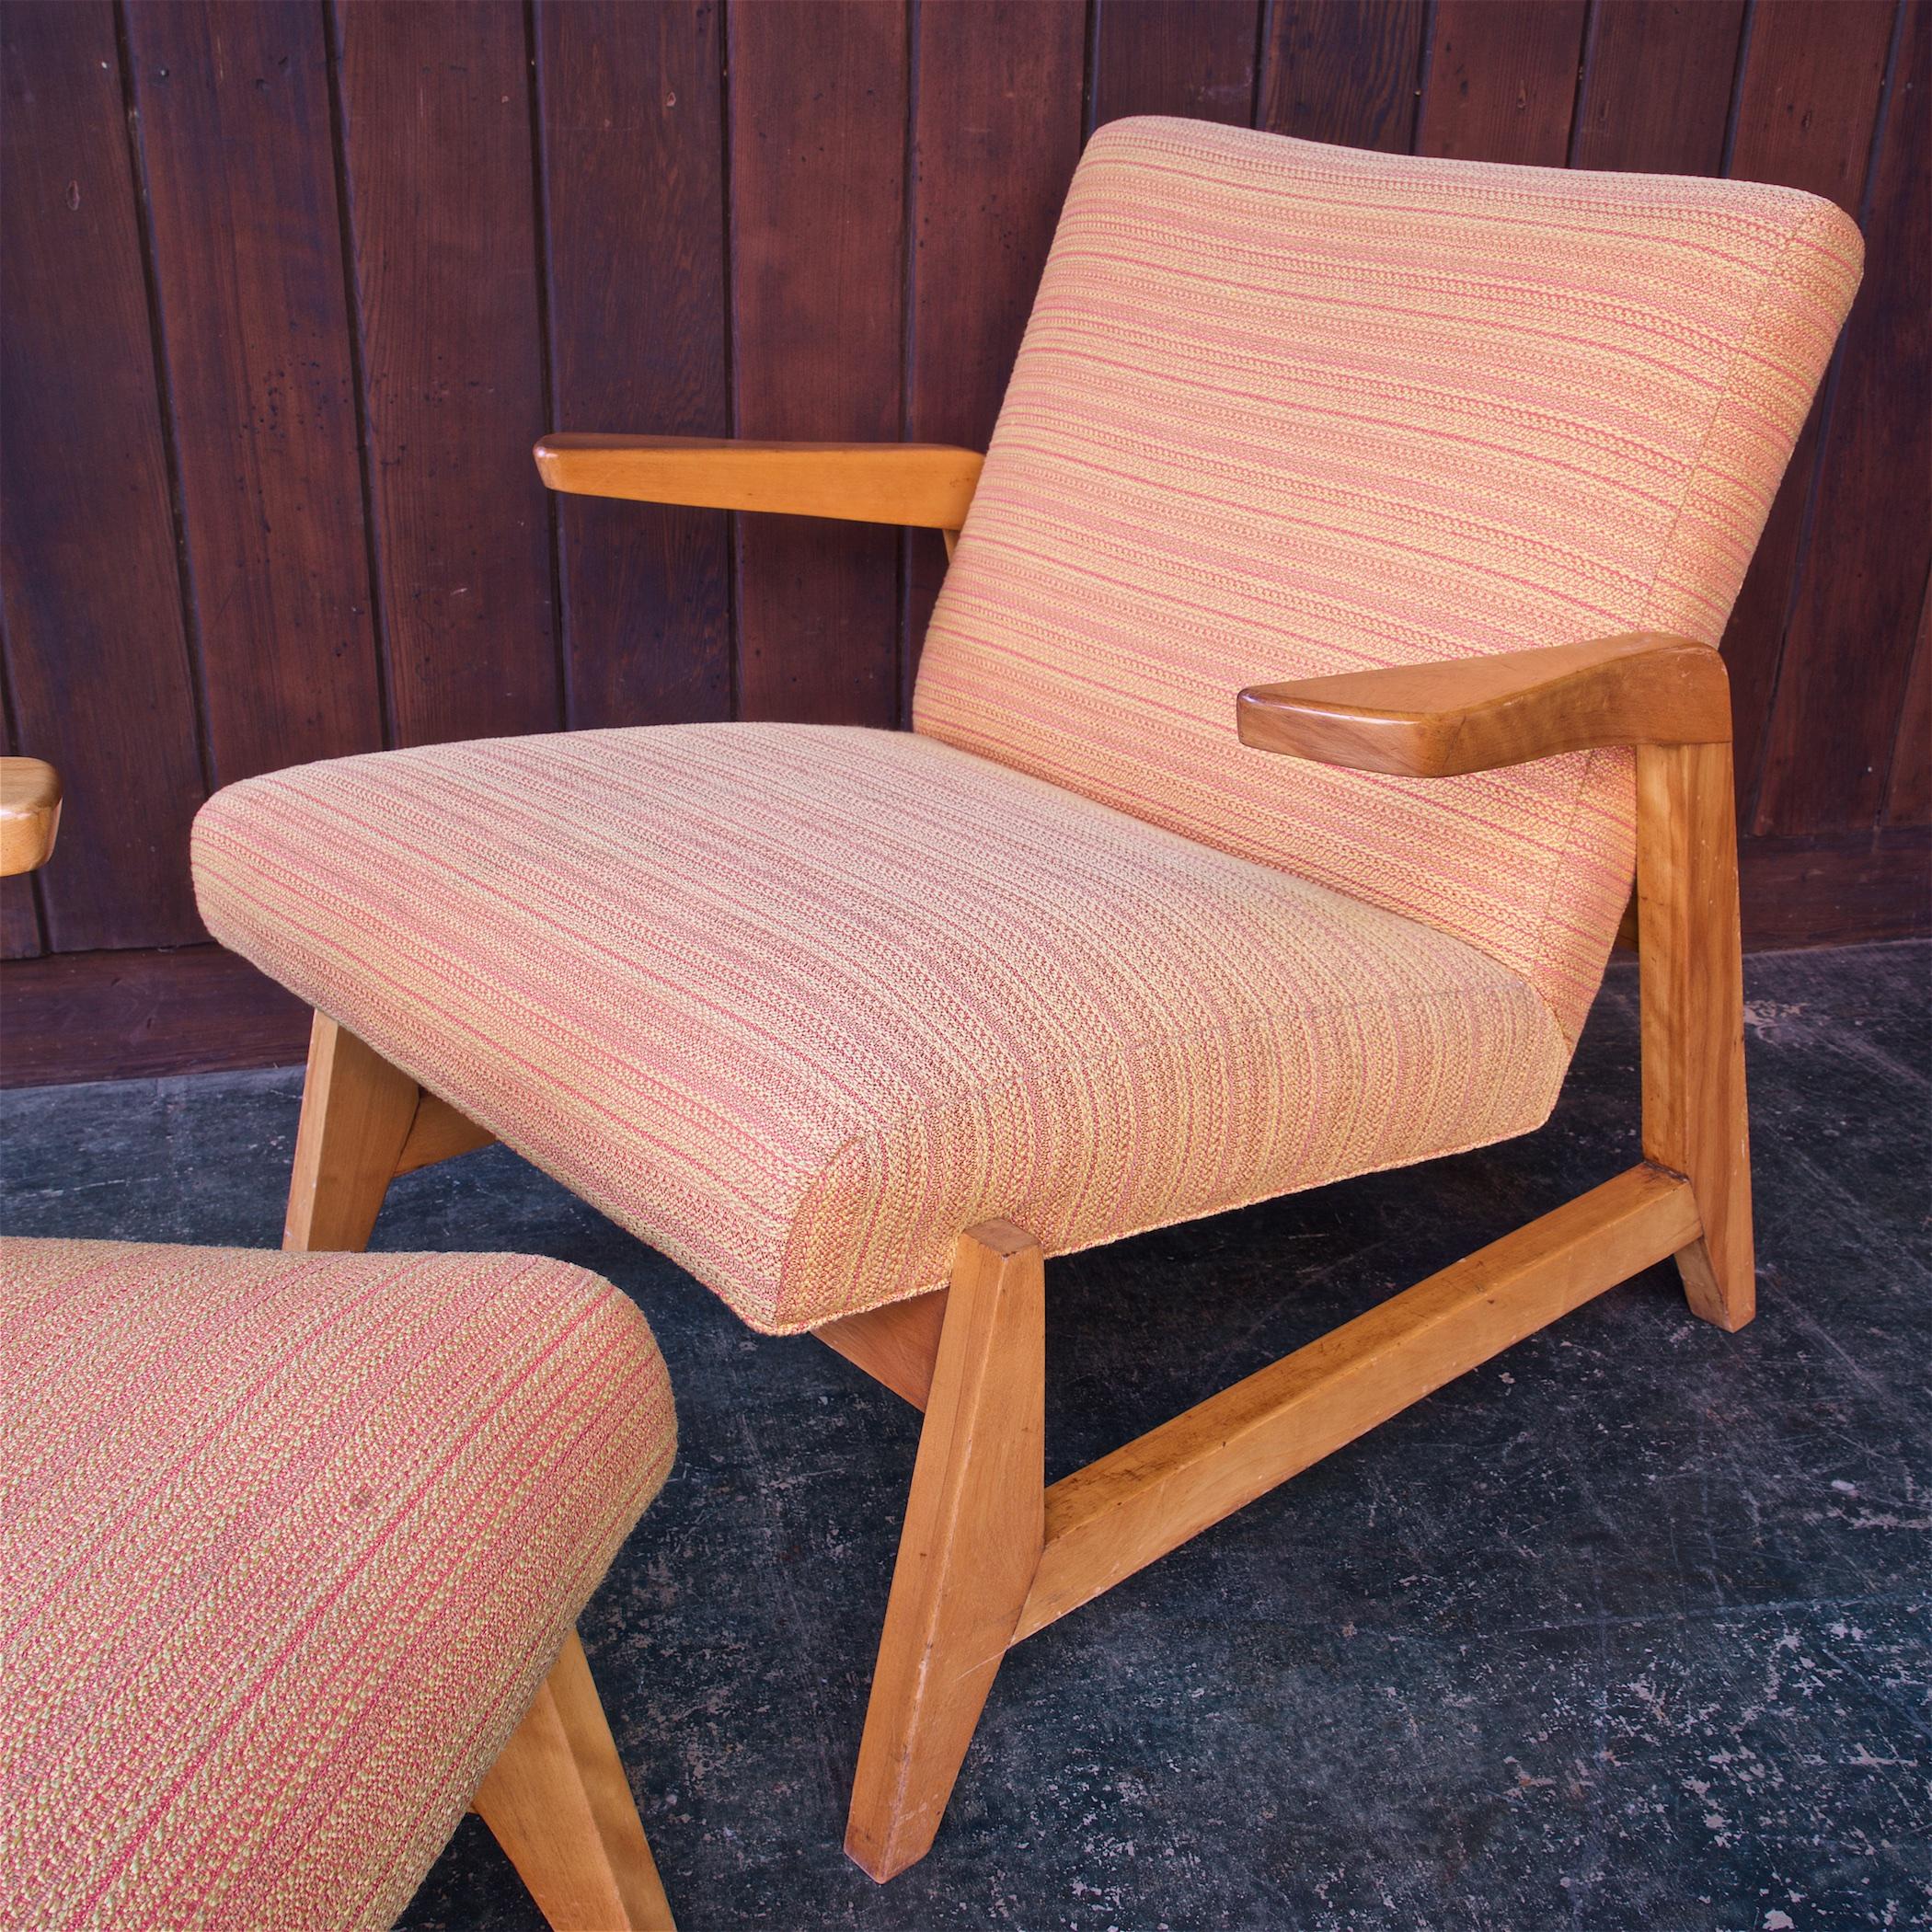 Pair Mid-Century Greenbelt Lounge Chairs by Ralph Rapson for Knoll 1940s Modern For Sale 4